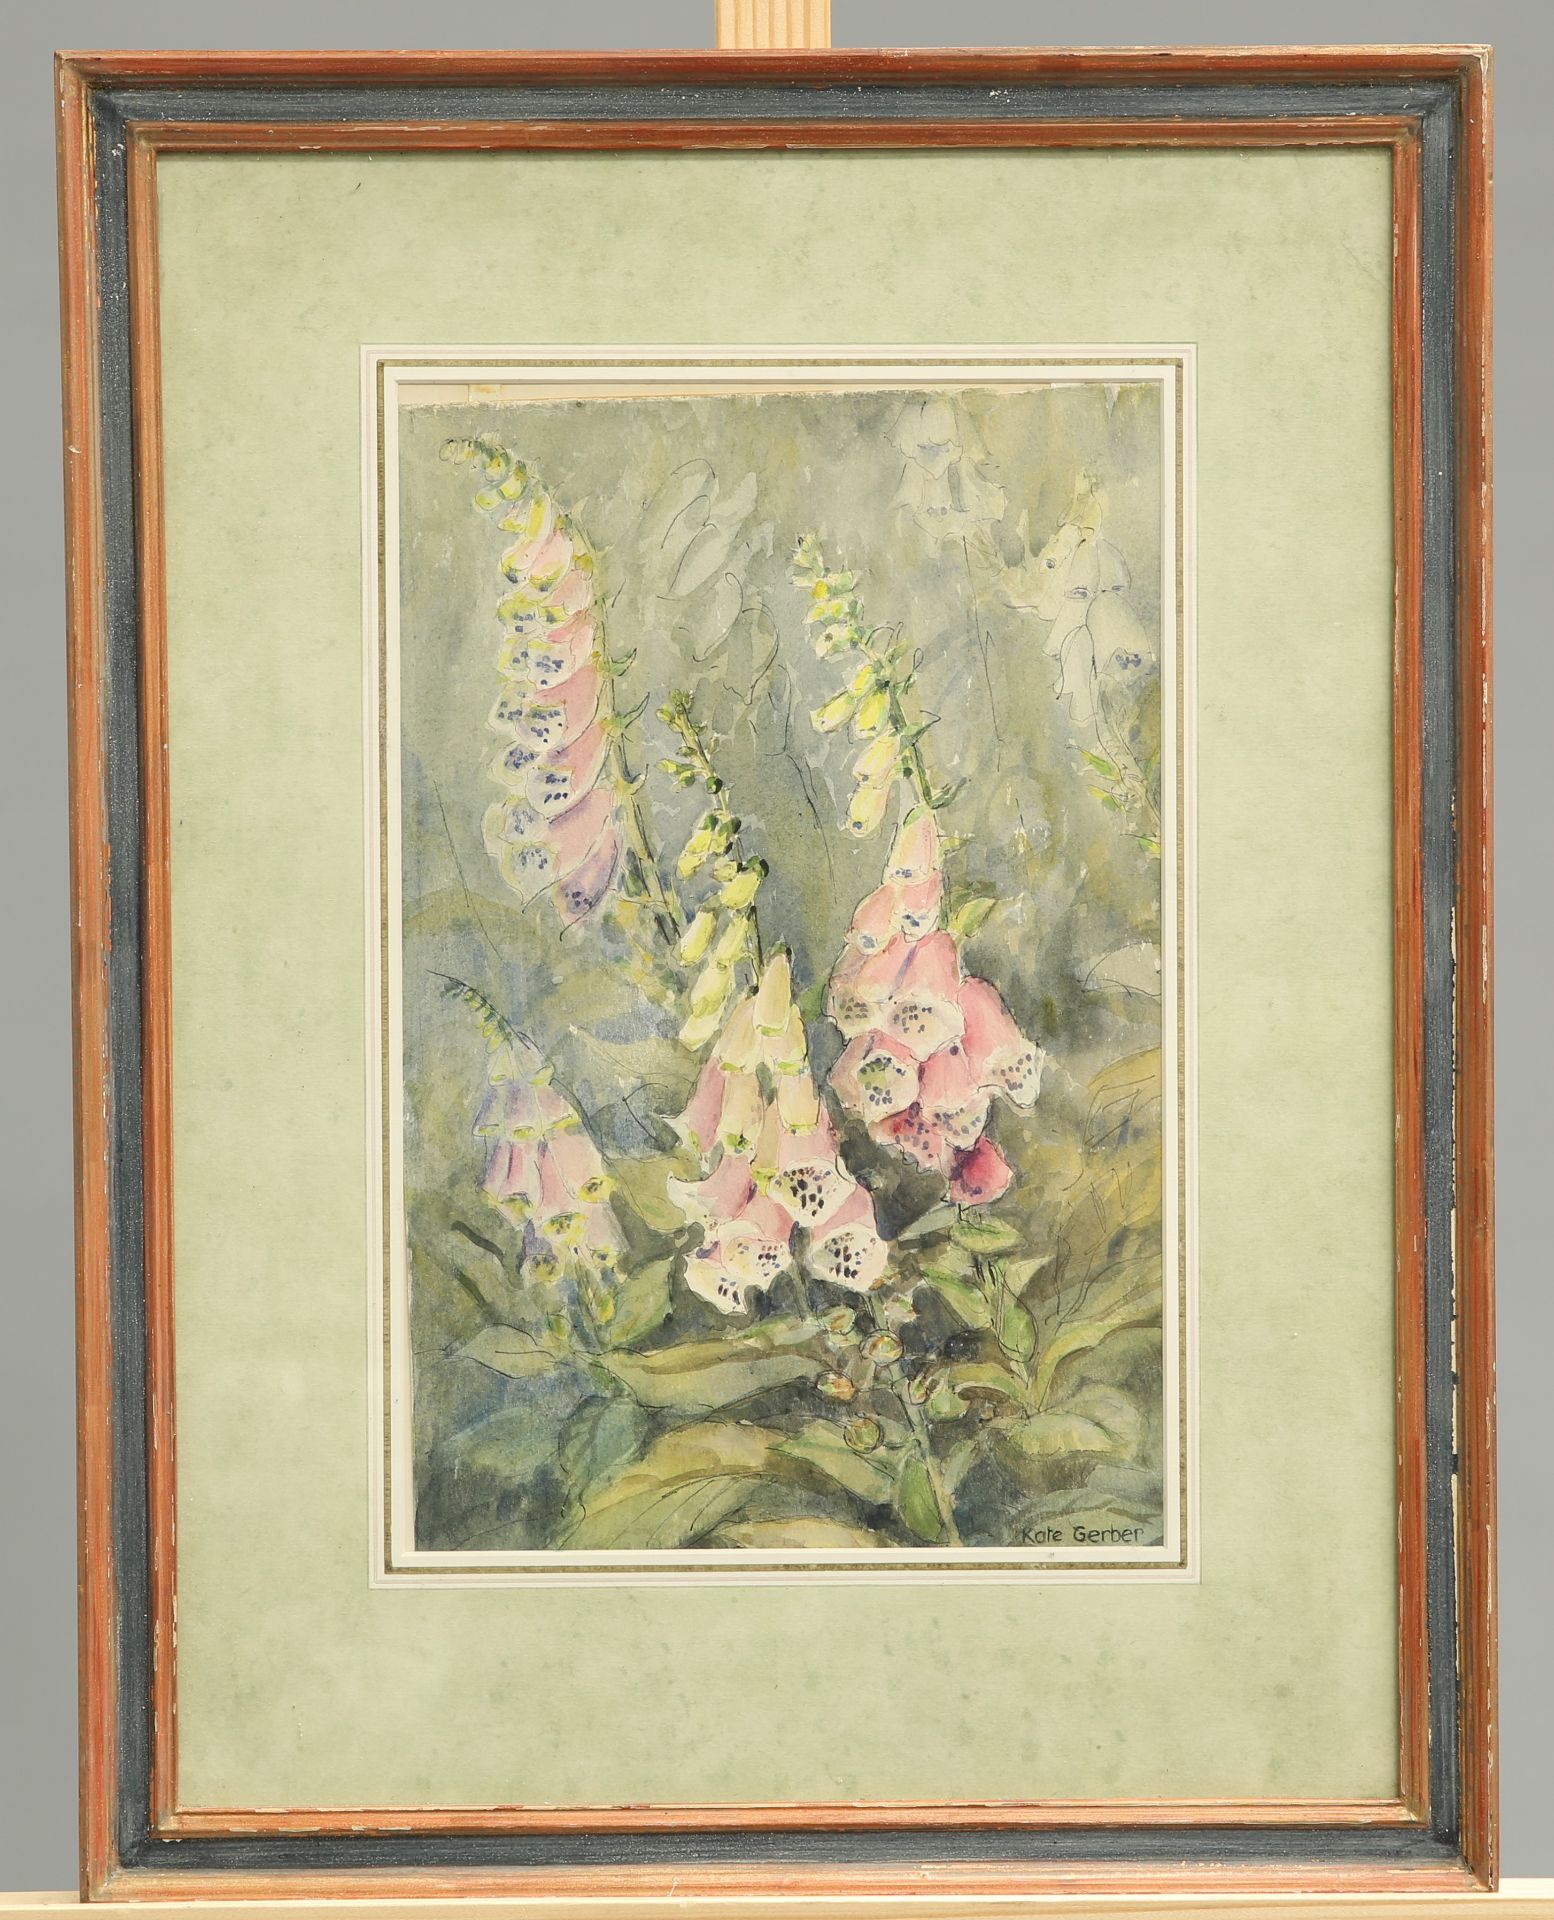 ~ KATE GERBER (20TH CENTURY), FOXGLOVES, signed lower right, watercolour, framed, 36.5cm by 24cm;